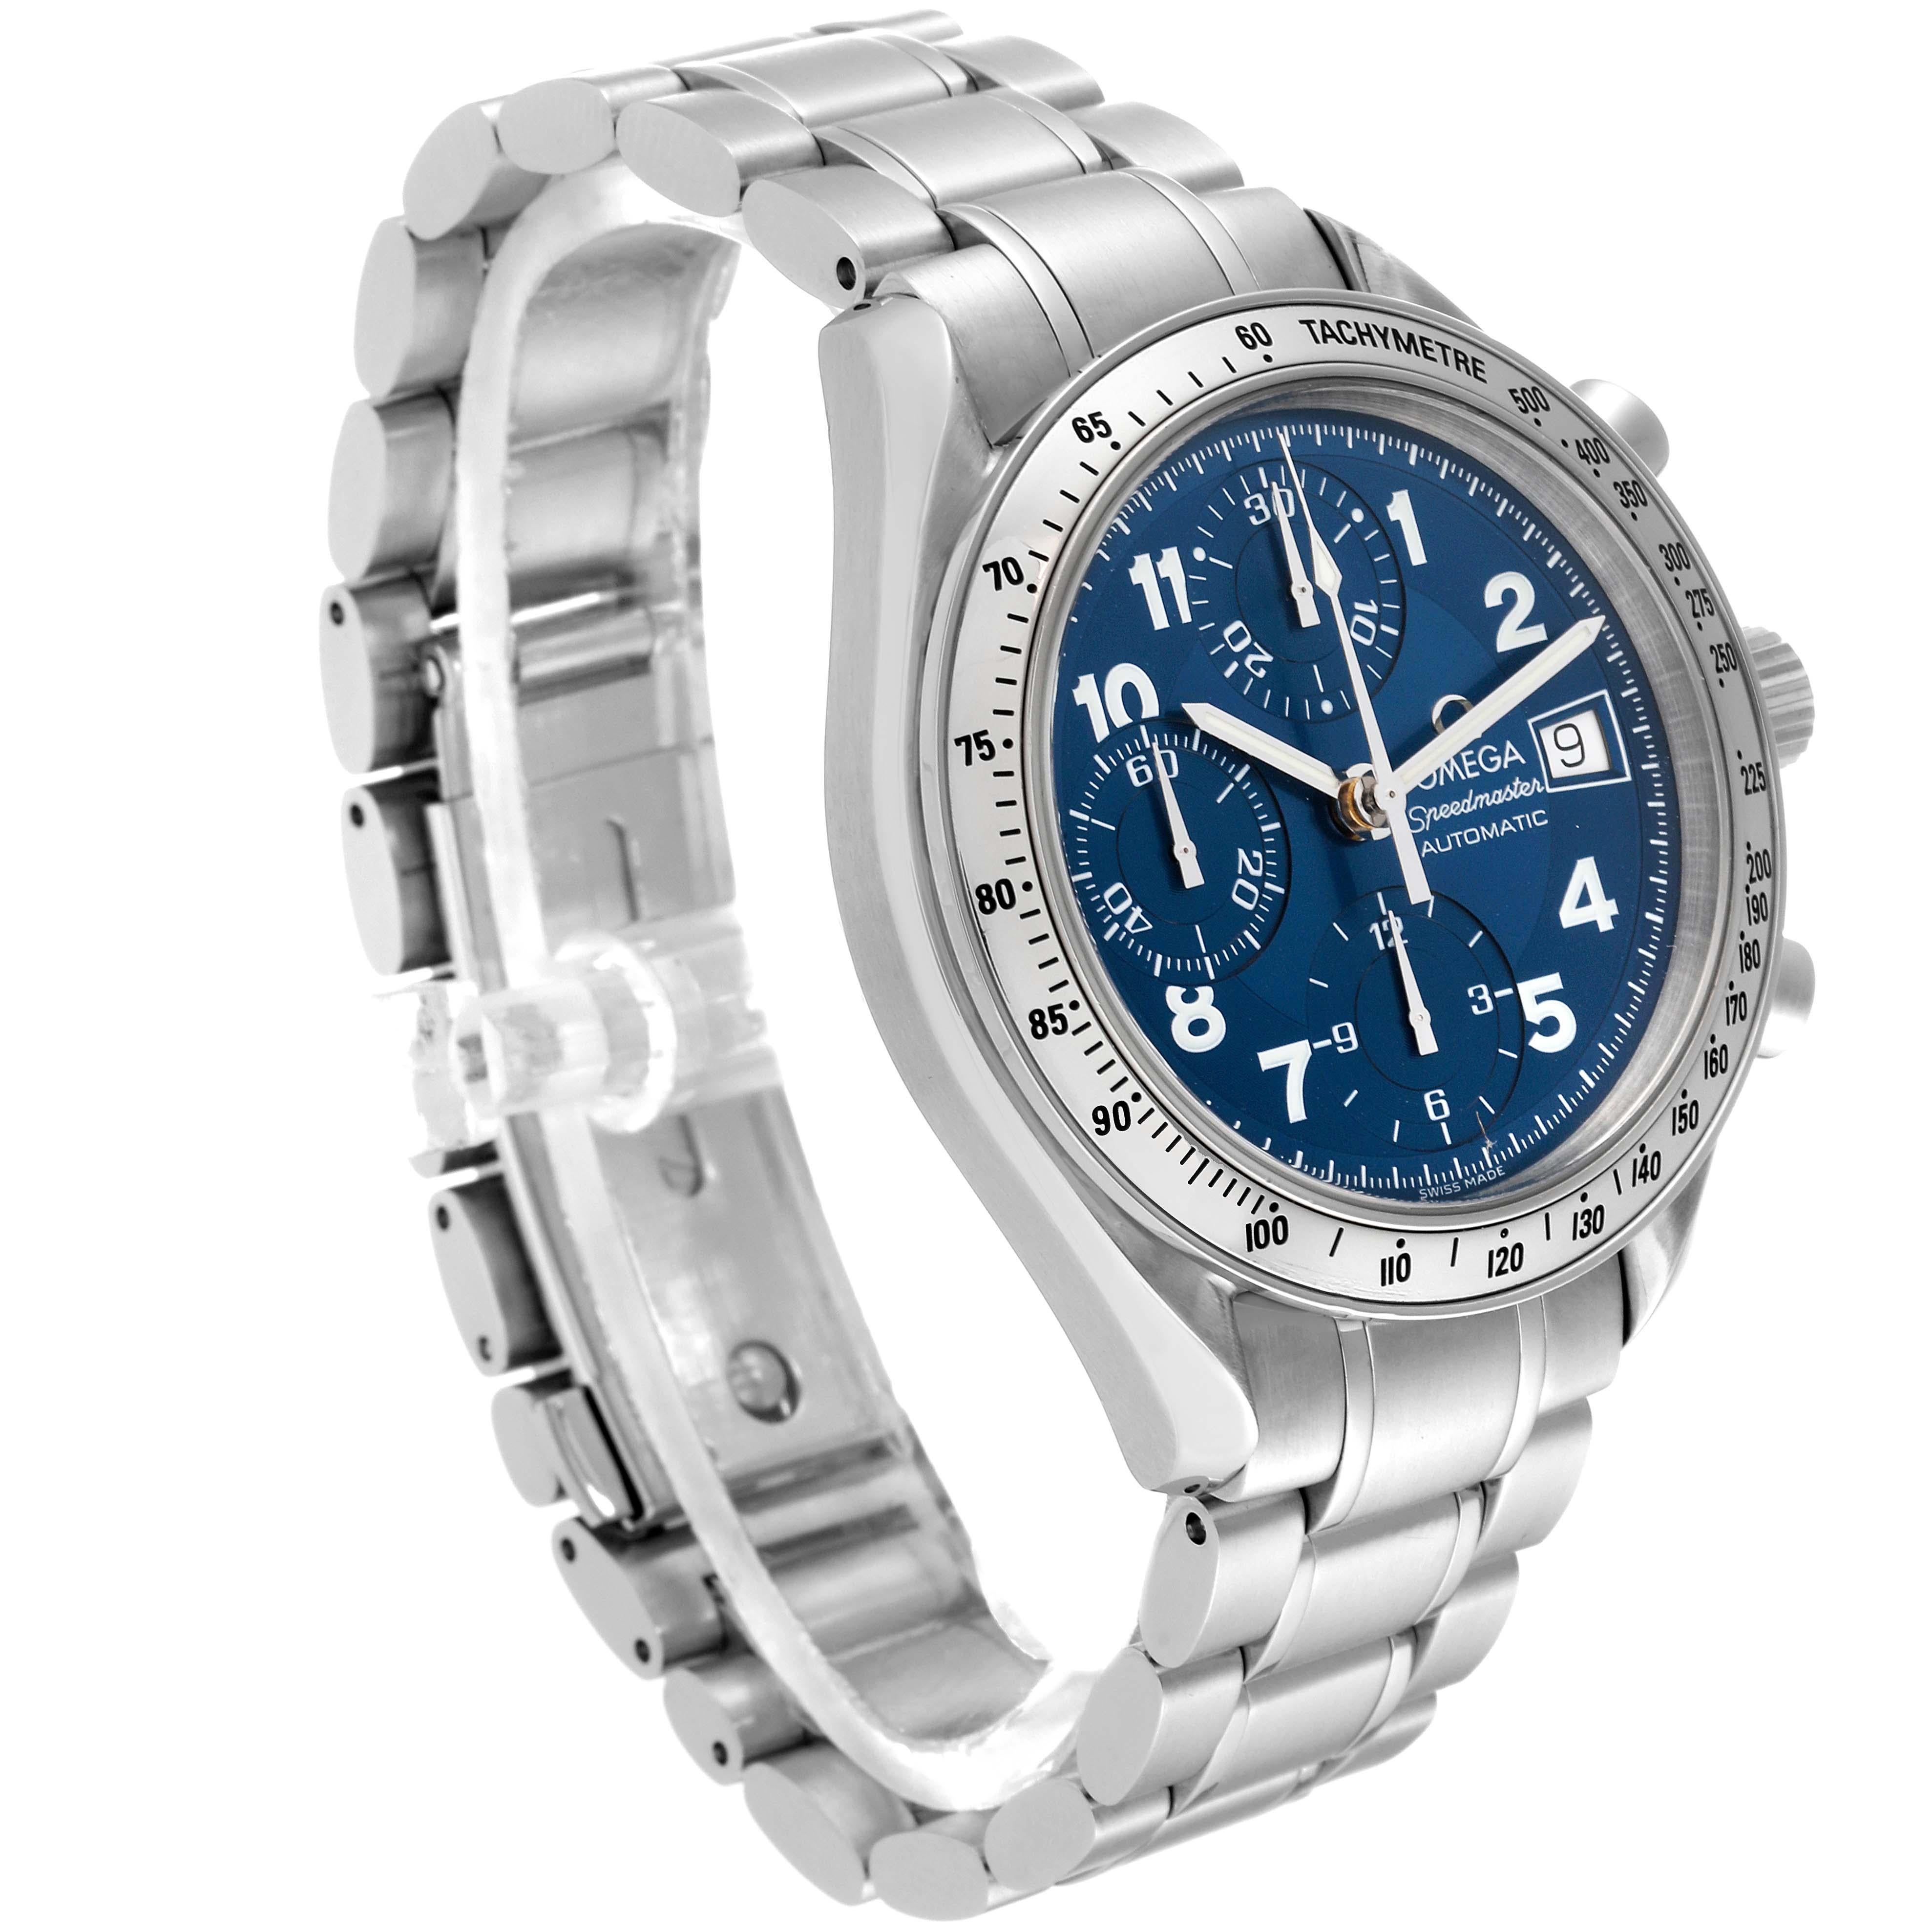 Omega Speedmaster Date 39 Blue Dial Chronograph Steel Mens Watch 3513.82.00. Automatic self-winding chronograph movement. Stainless steel round case 39 mm in diameter. Stainless steel bezel with tachymetric scale. Scratch-resistant sapphire crystal